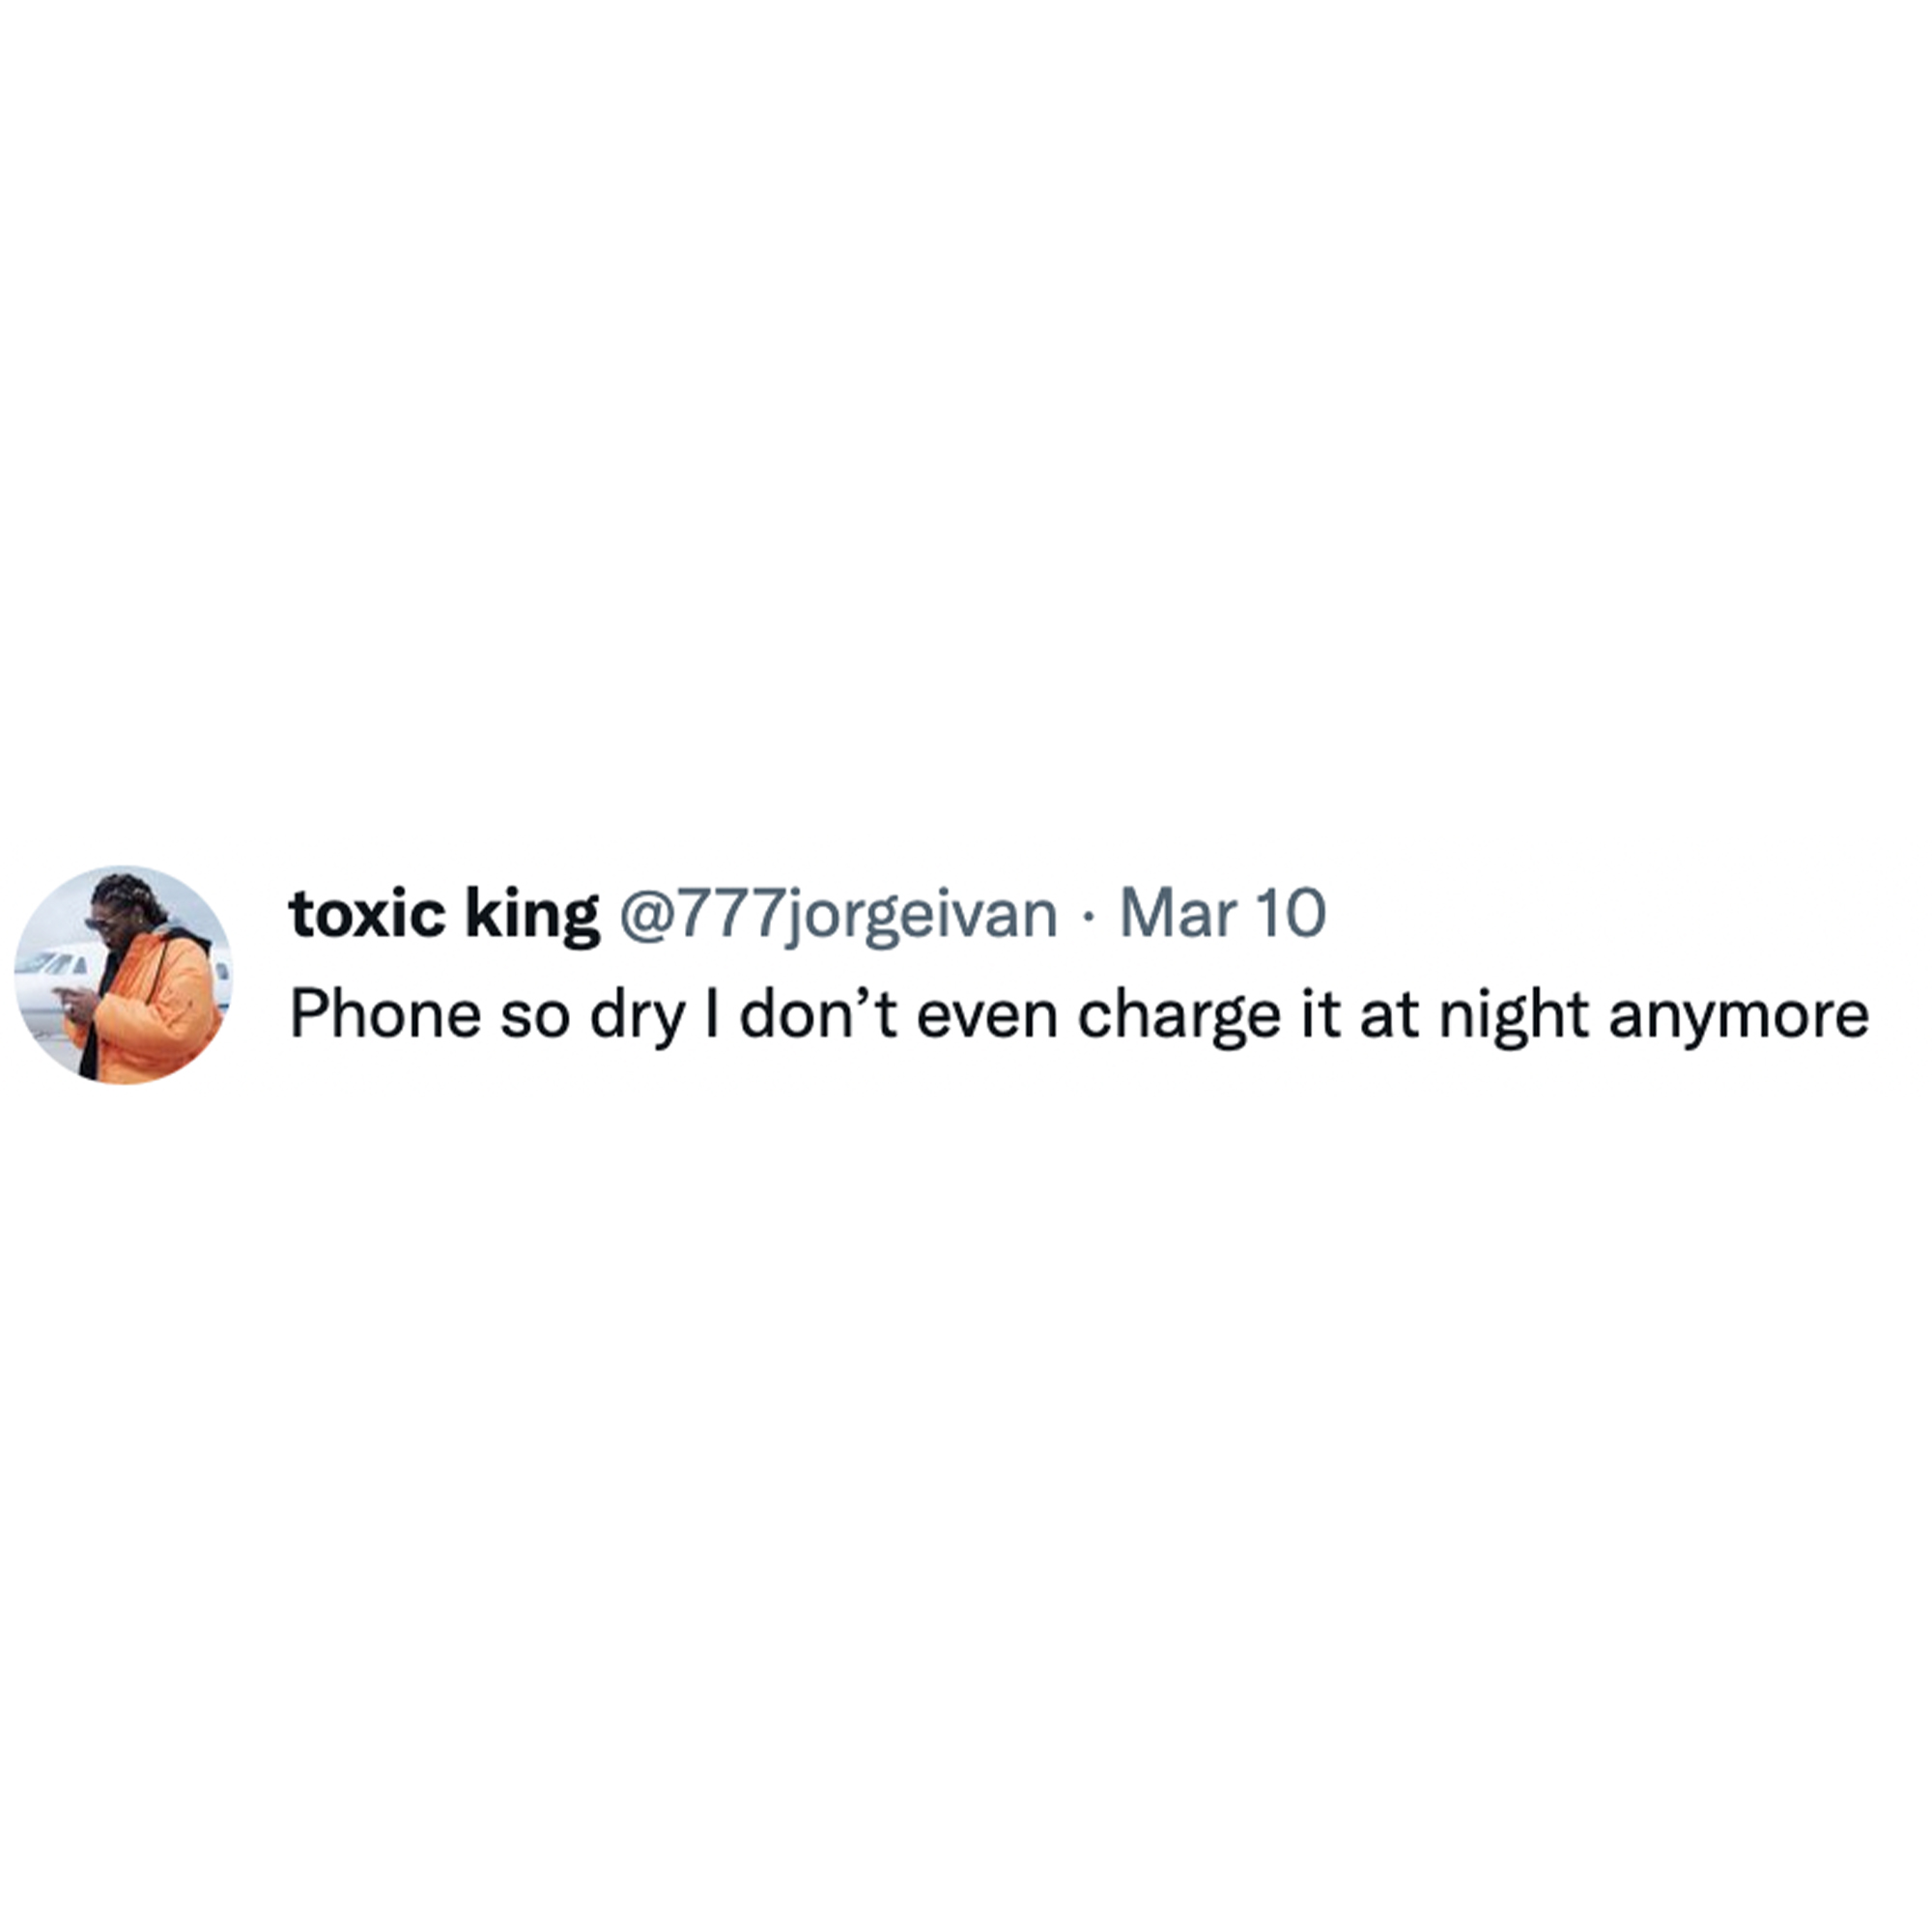 Toxic Memes and Tweets - toxic king . Mar 10 Phone so dry I don't even charge it at night anymore